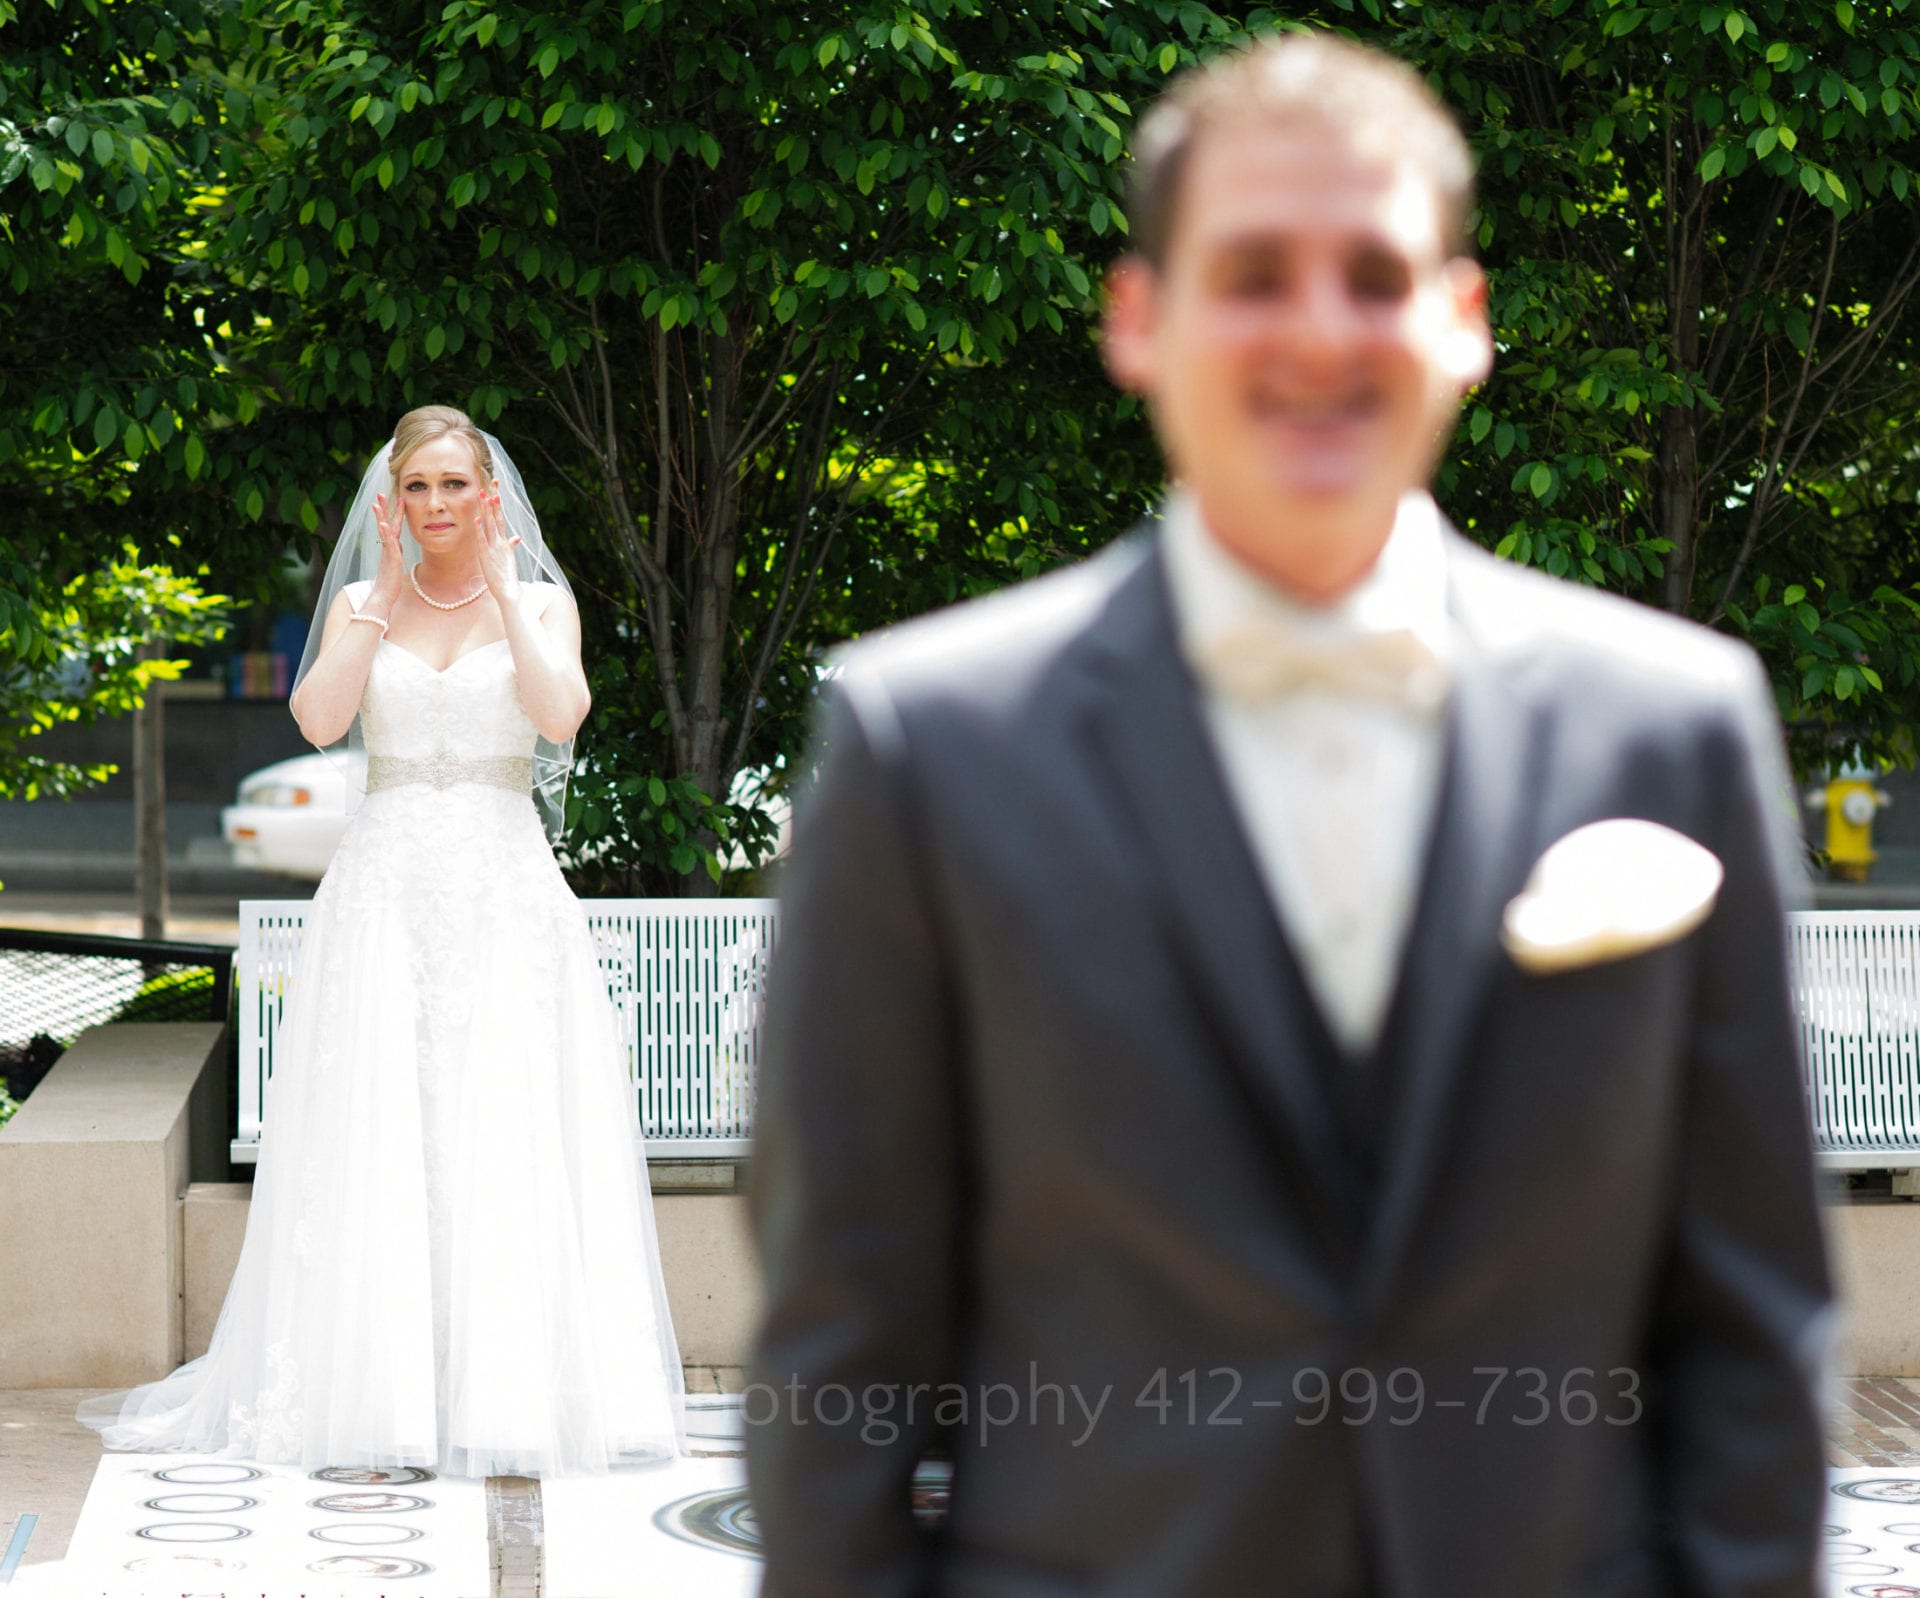 A bride wipes tears from her eyes before walking up to her fiance who stands facing away from her Fairmont Hotel Pittsburgh Weddings.